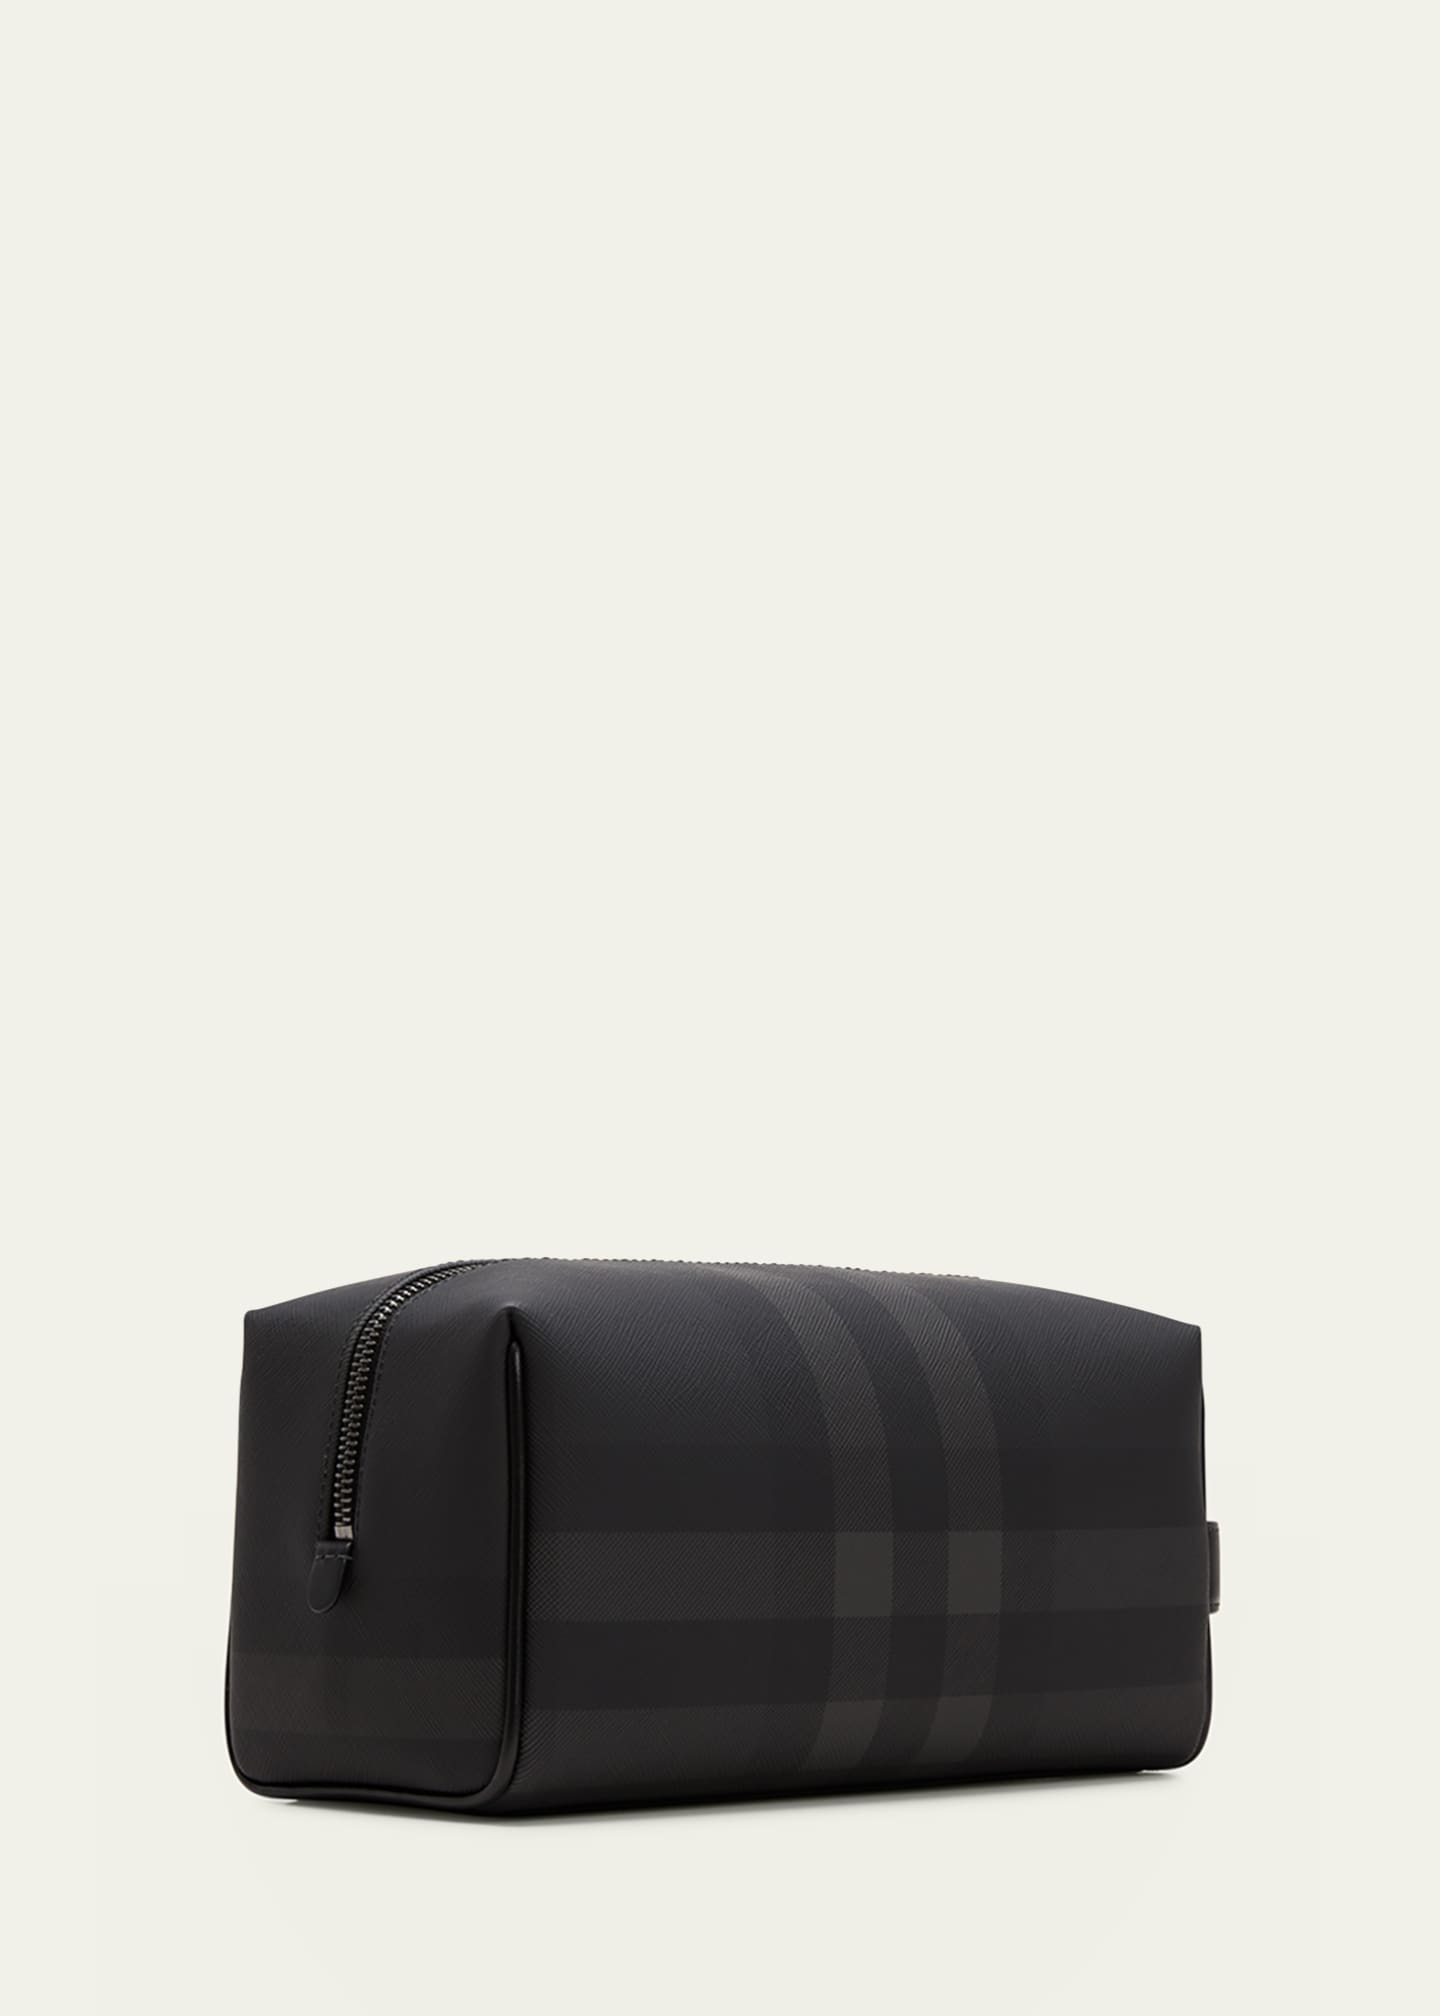 Burberry Men's Check Leather-trimmed Travel Pouch - Charcoal